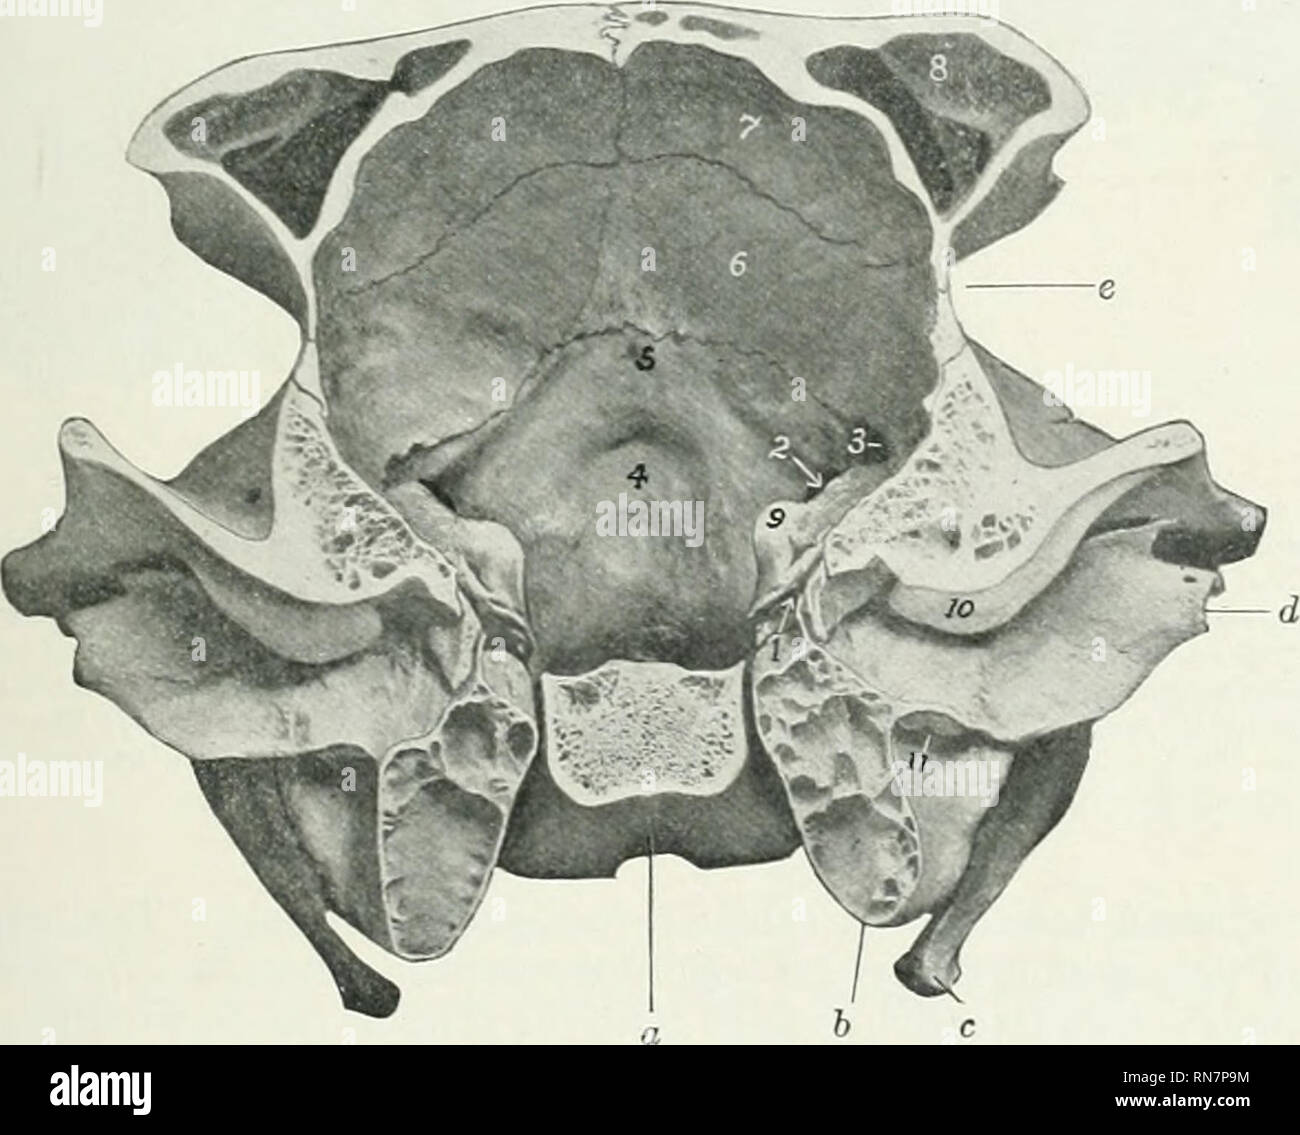 . The anatomy of the domestic animals. Veterinary anatomy. FjG.^iSO:—Cross-section of Cranium of Ox. The section cats the posterior part of the temporal condyle and is viewed from behind, a, Body of sphenoid; 6, bulla ossea; r, temporal condyle; 1, dorsum sellse; 2, foramen ovale; 'S. hj-pophyseal or pituitary fossa; 4. foramen orbito-rotundum; 5, optic foramina; 6, crista galli; 7. cribriform plate of ethmoid; S. orbital wing of sphenoid; 9, temporal wing of sphenoid; 10. internal plate of frontal bone; 11. frontal sinus; 12, temporal process of malar bone.. Fig. 131.—Cross-section of Craniu. Stock Photo